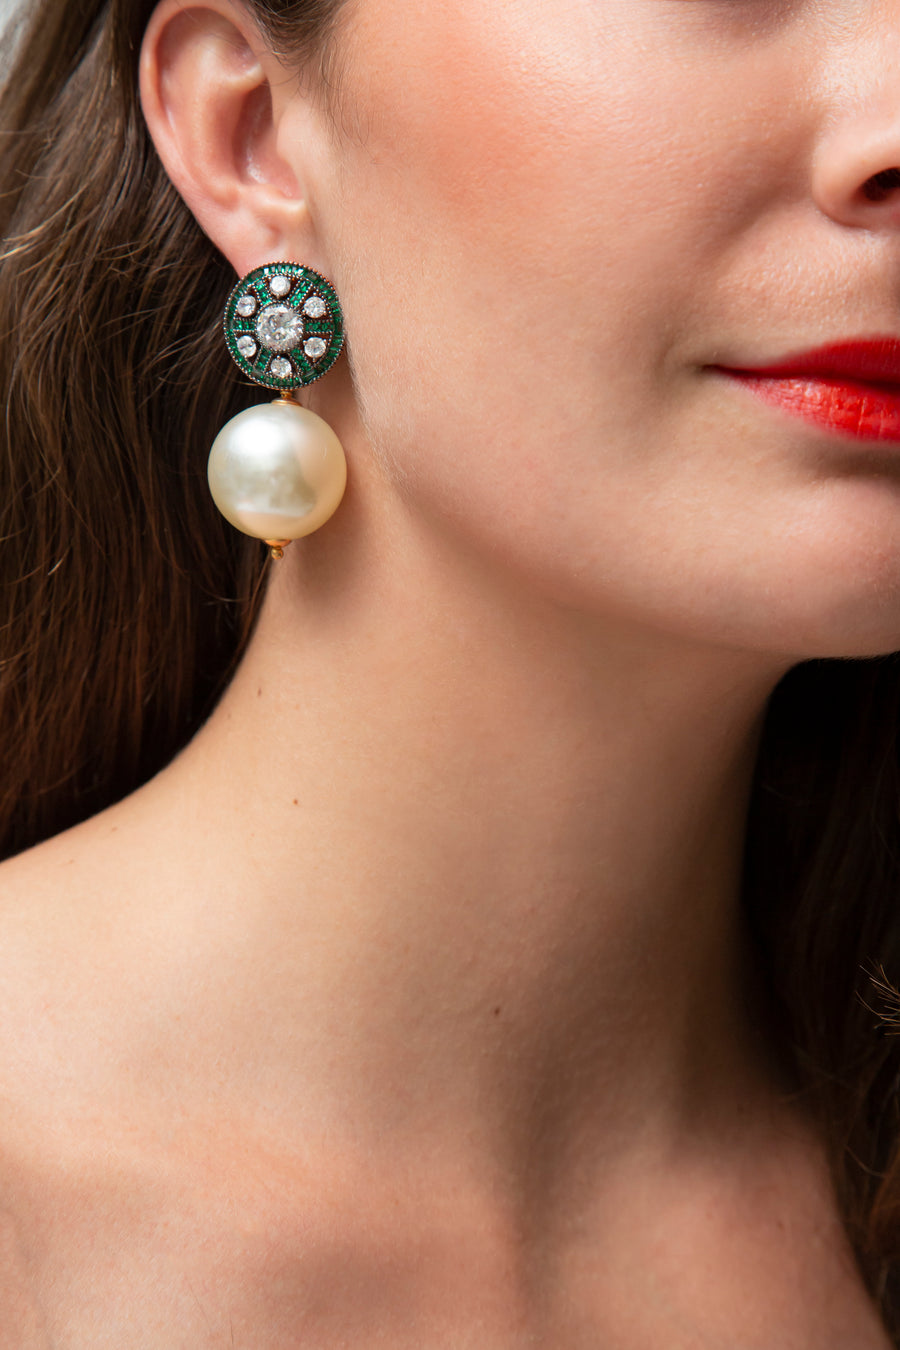 Sparkly Emerald Drop Earring with Mini White Ball